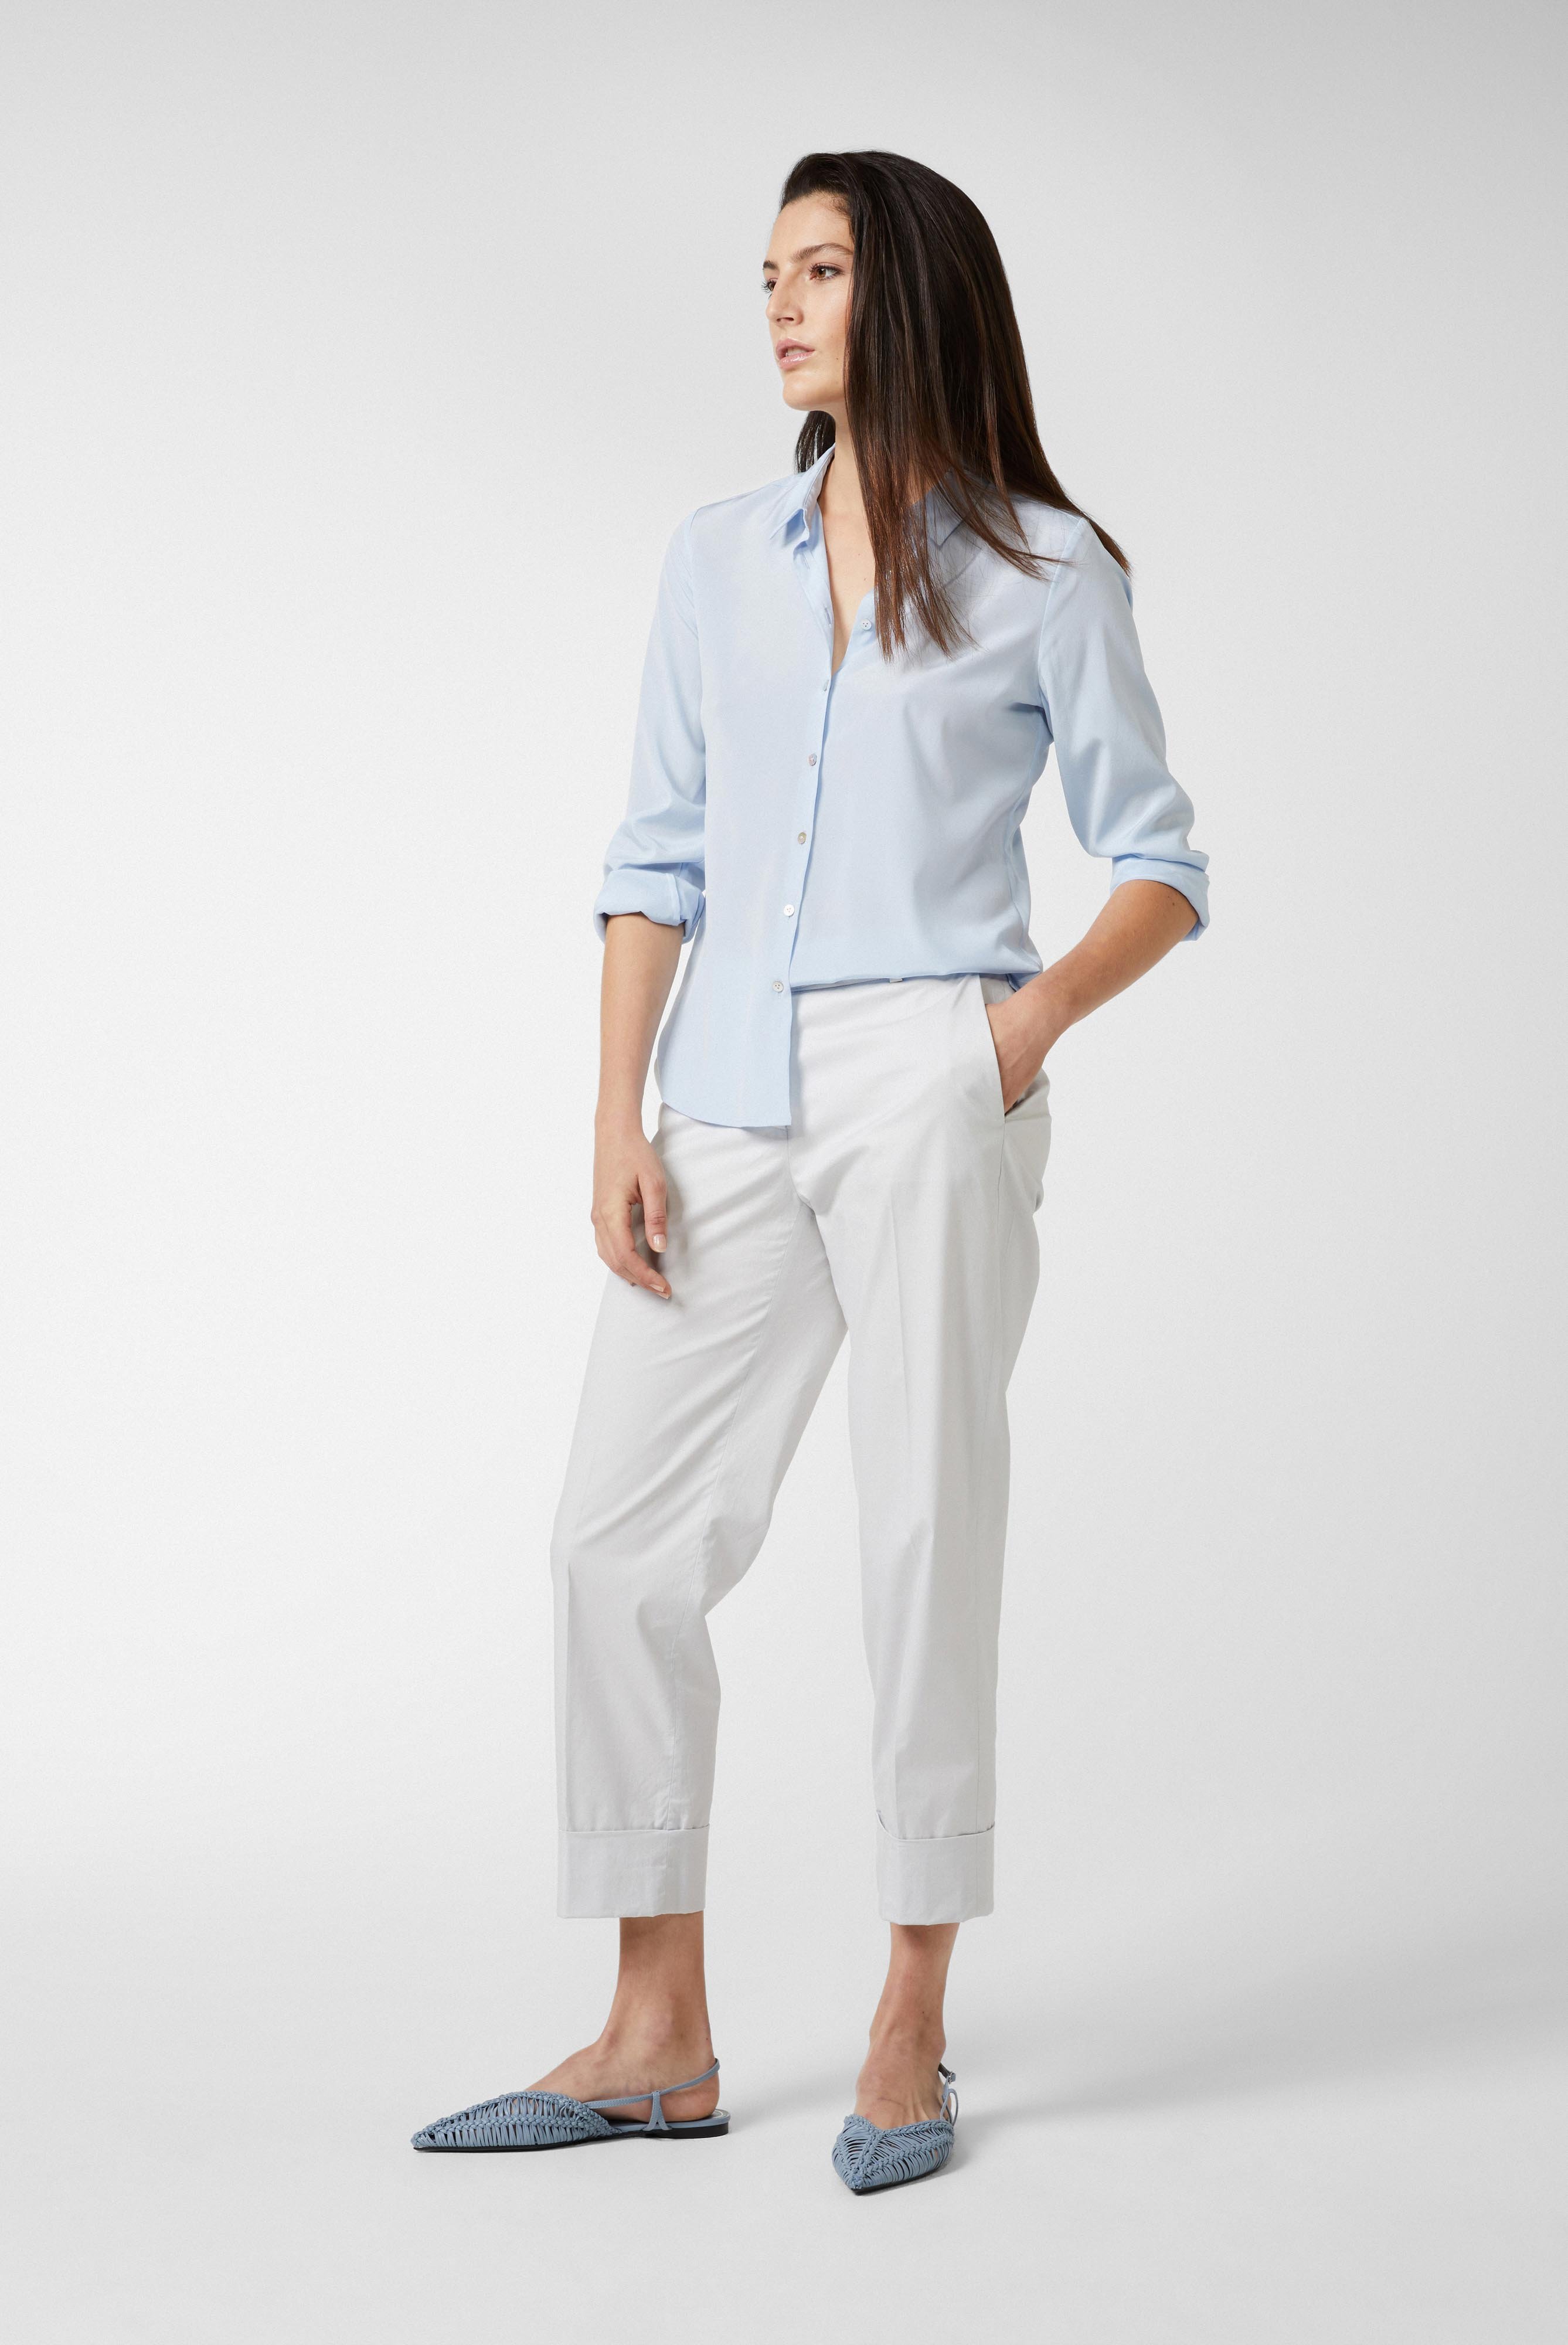 Business Blouses+Shirt with silk and stretch+05.511Z.07.155553.713.32